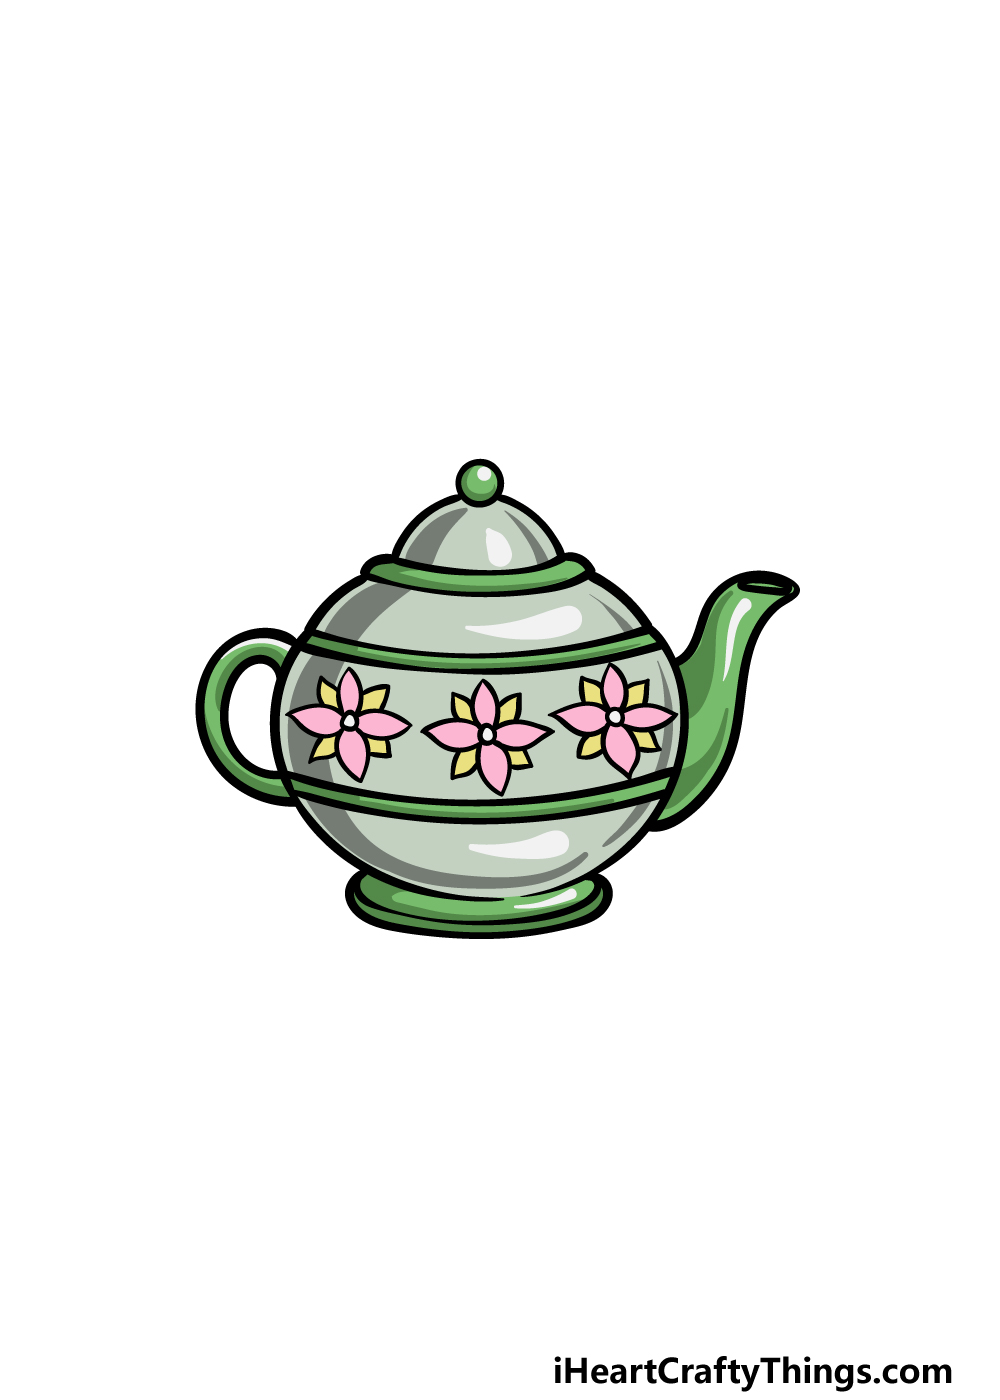 Teapot Drawing - How To Draw A Teapot Step By Step